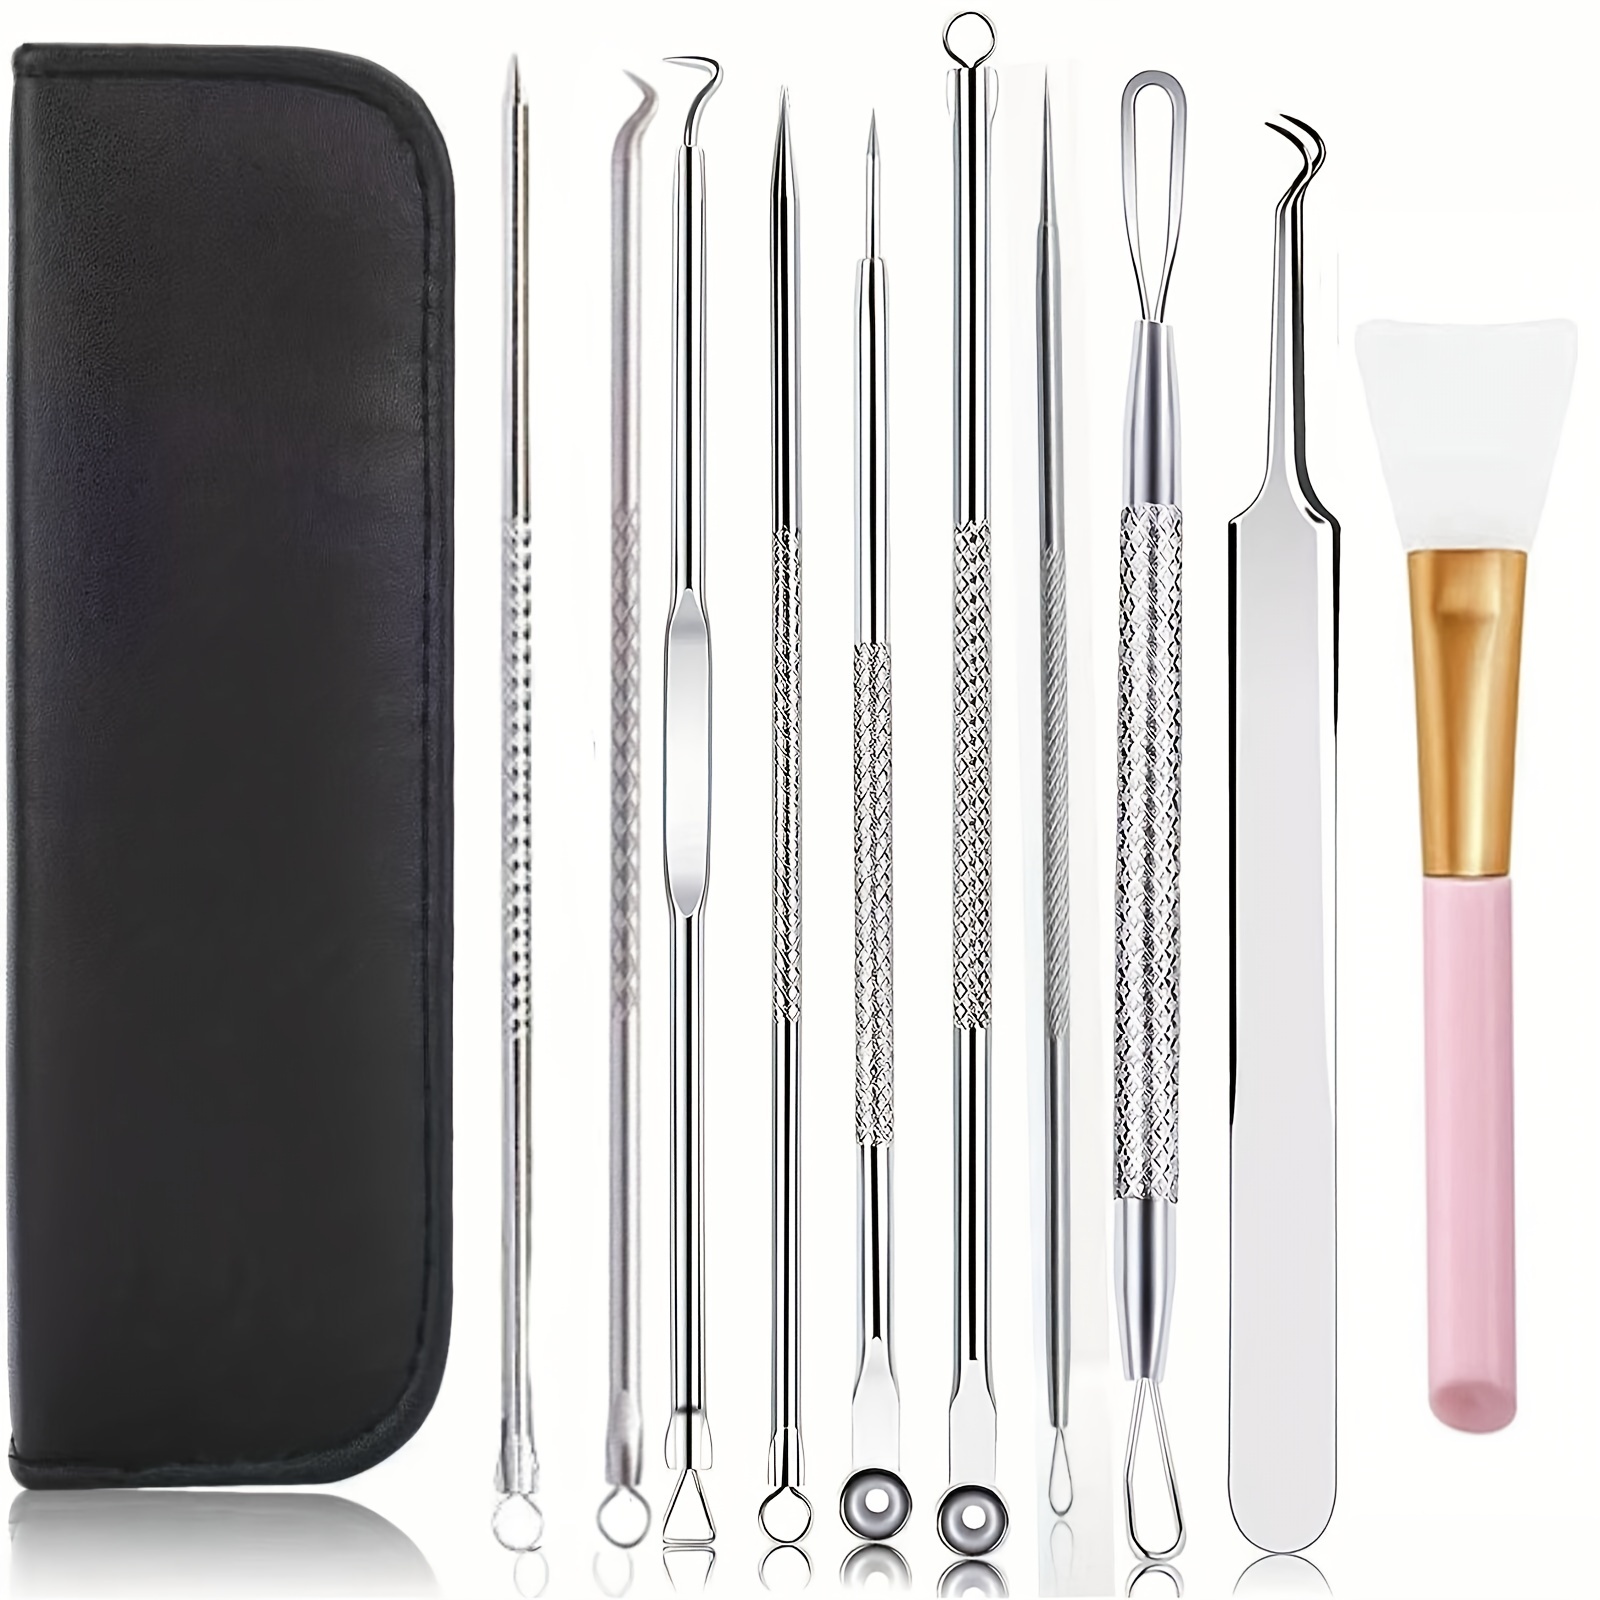 Blackhead Remover Comedone Extractor, Pimple Extractors Extractor Kit,  Popper Extraction Tool Loop Curved Tweezers With Free Double-headed Mask  Brush